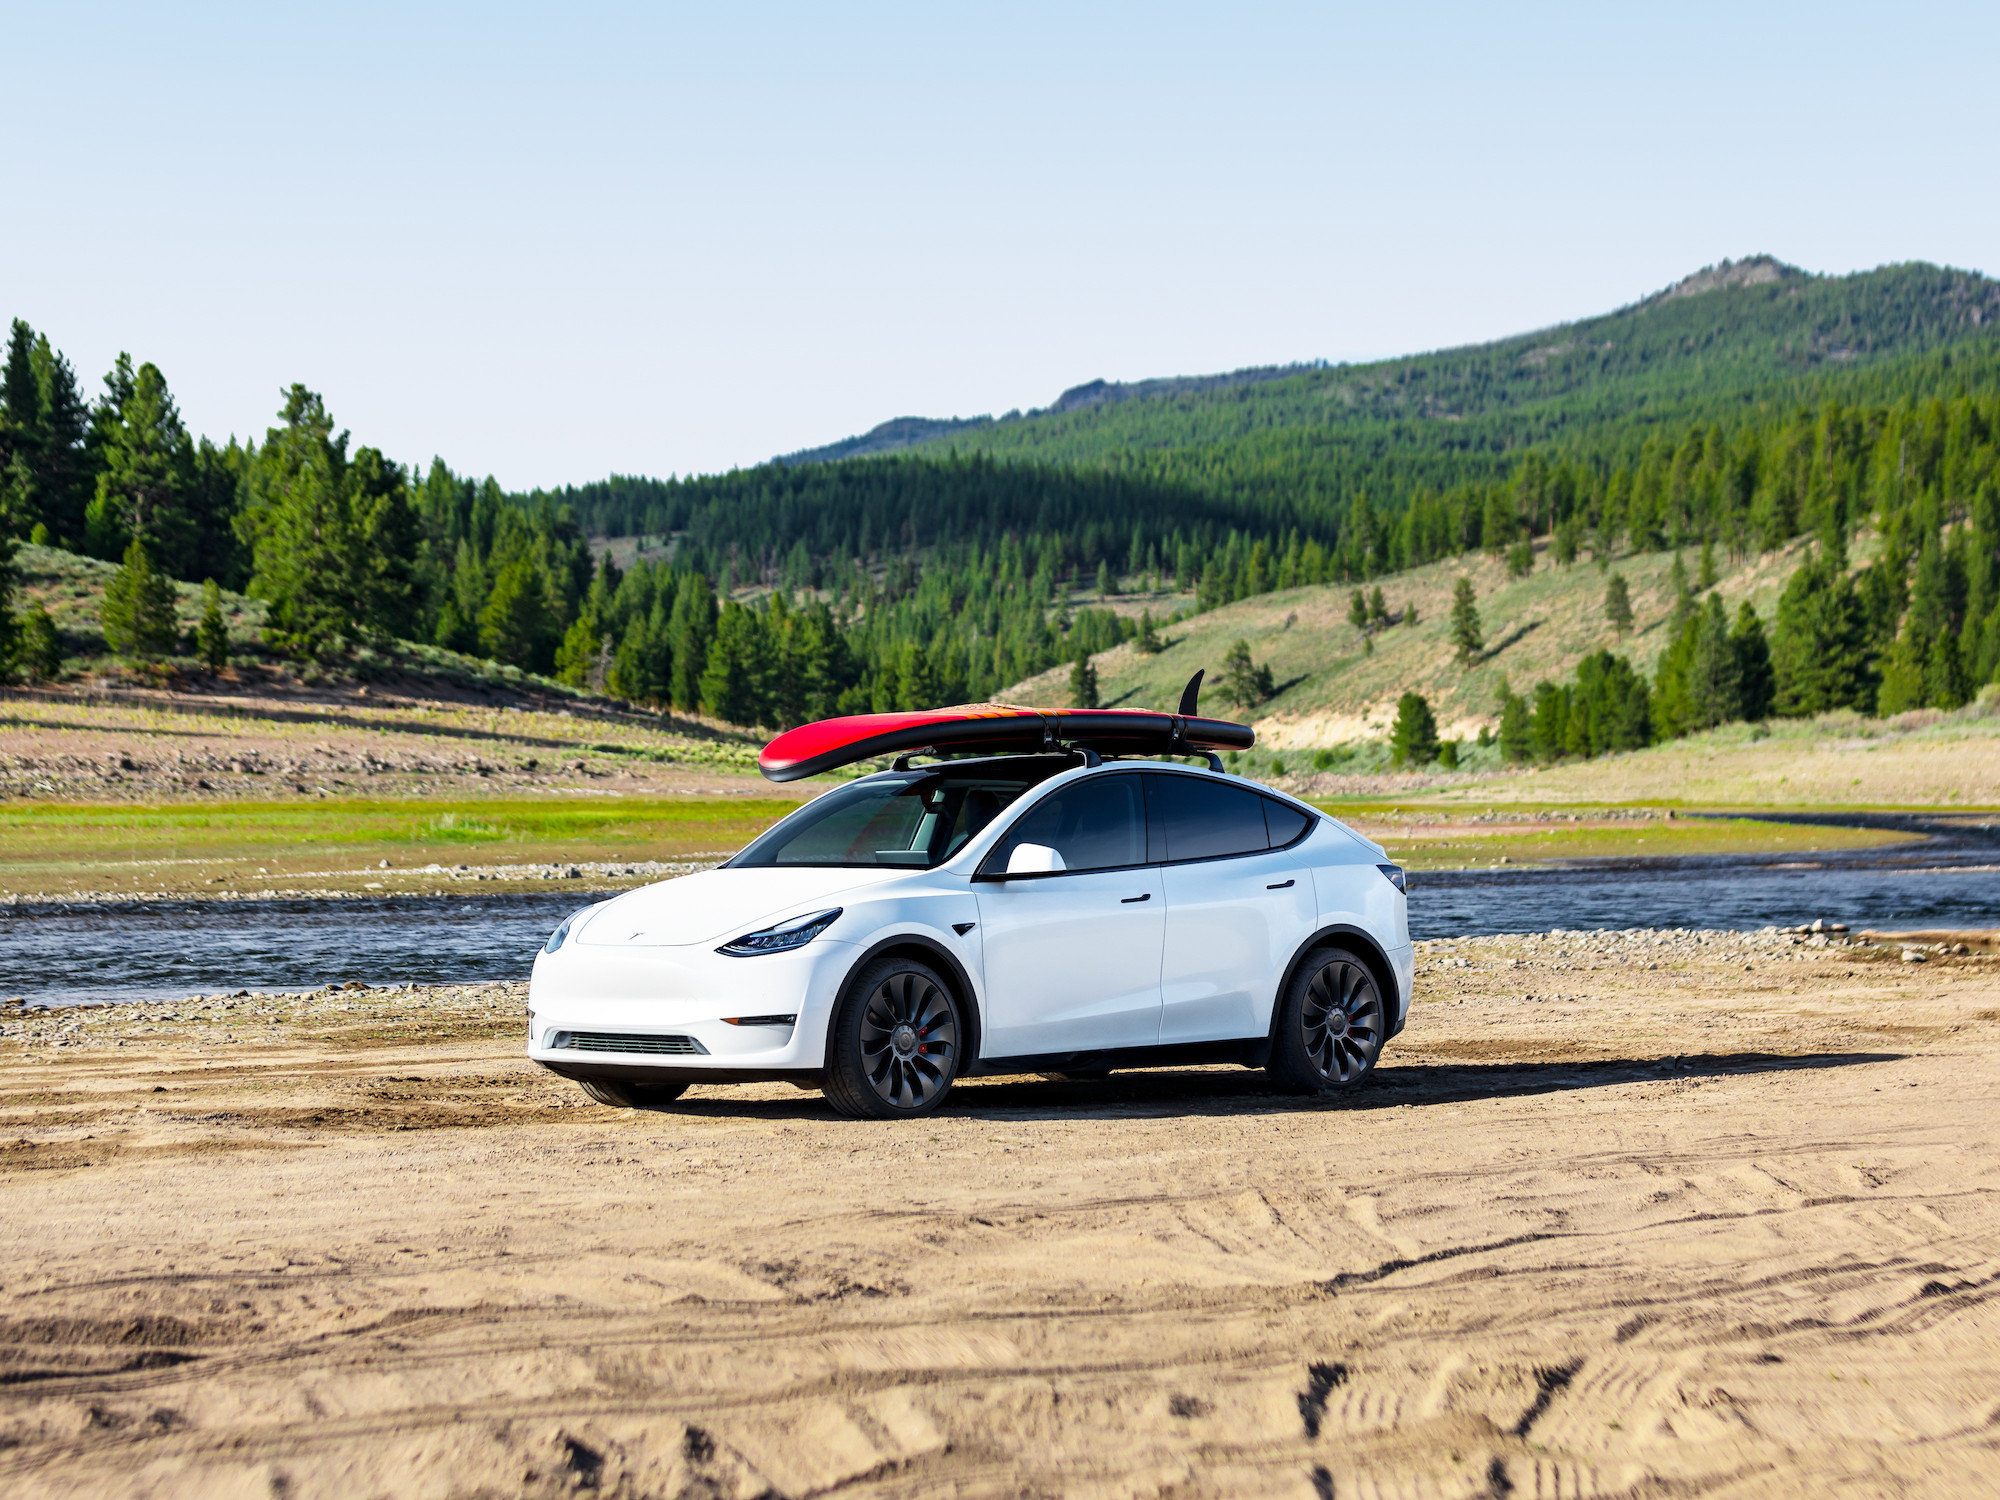 A white 2021 Tesla Model Y parked on the sand next to a river with pine trees and mountains in the distance